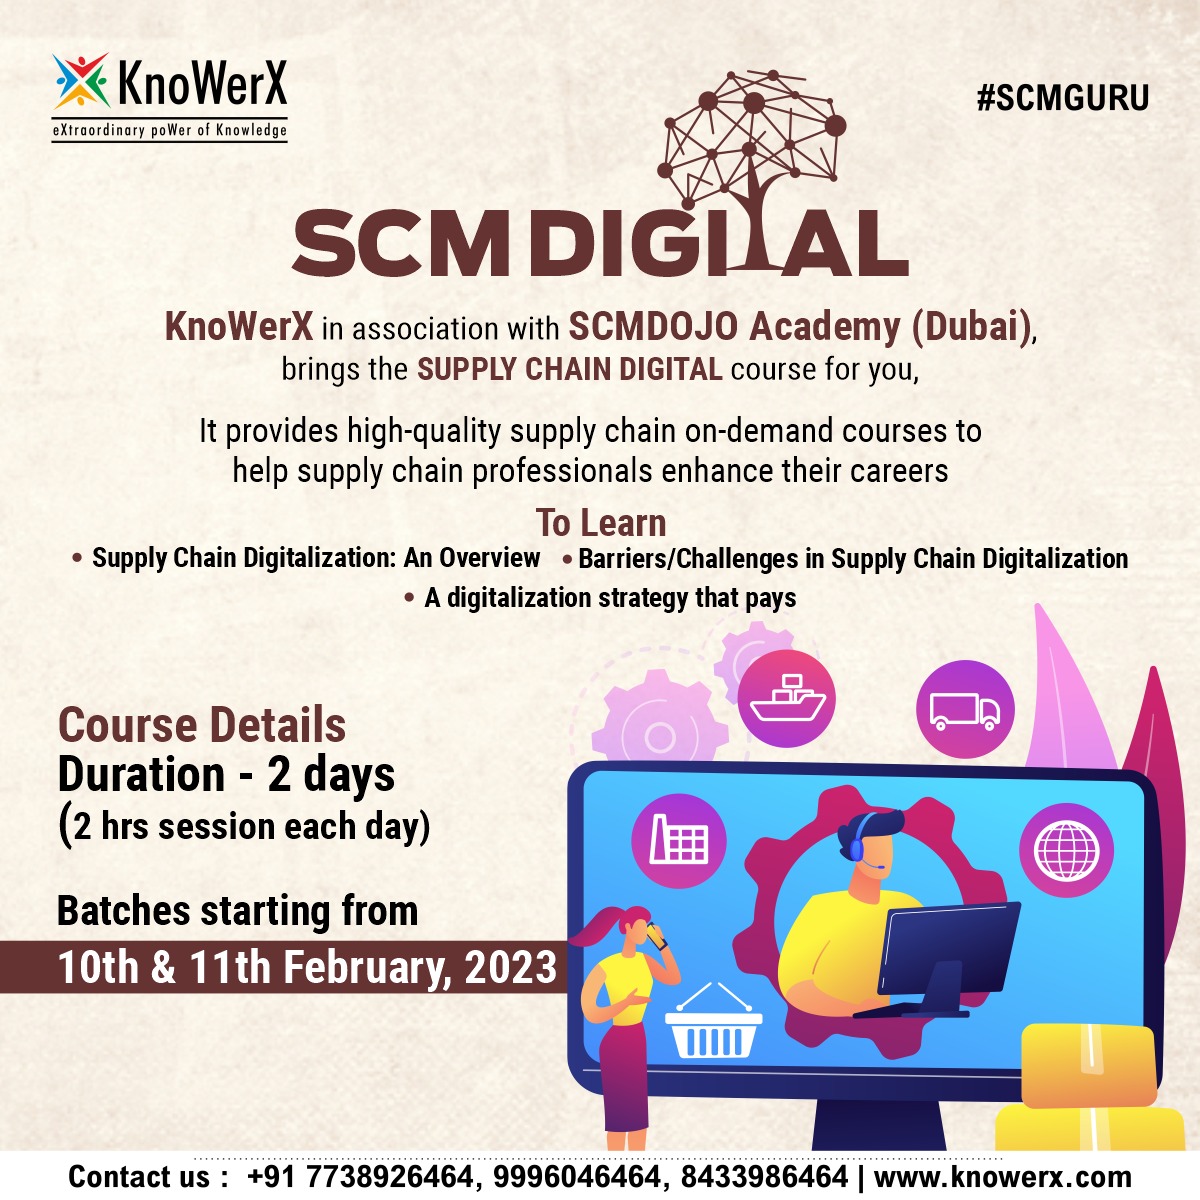 For any information related to the course contact us on 7738343464
#digitalscmcourse #knowerx #certification #scmguru #supplychaindigitalization #enrollnow #supplychain #supplychainmanagement #supplychaintraining #supplychainmanagementjobs #digitalsupplychain